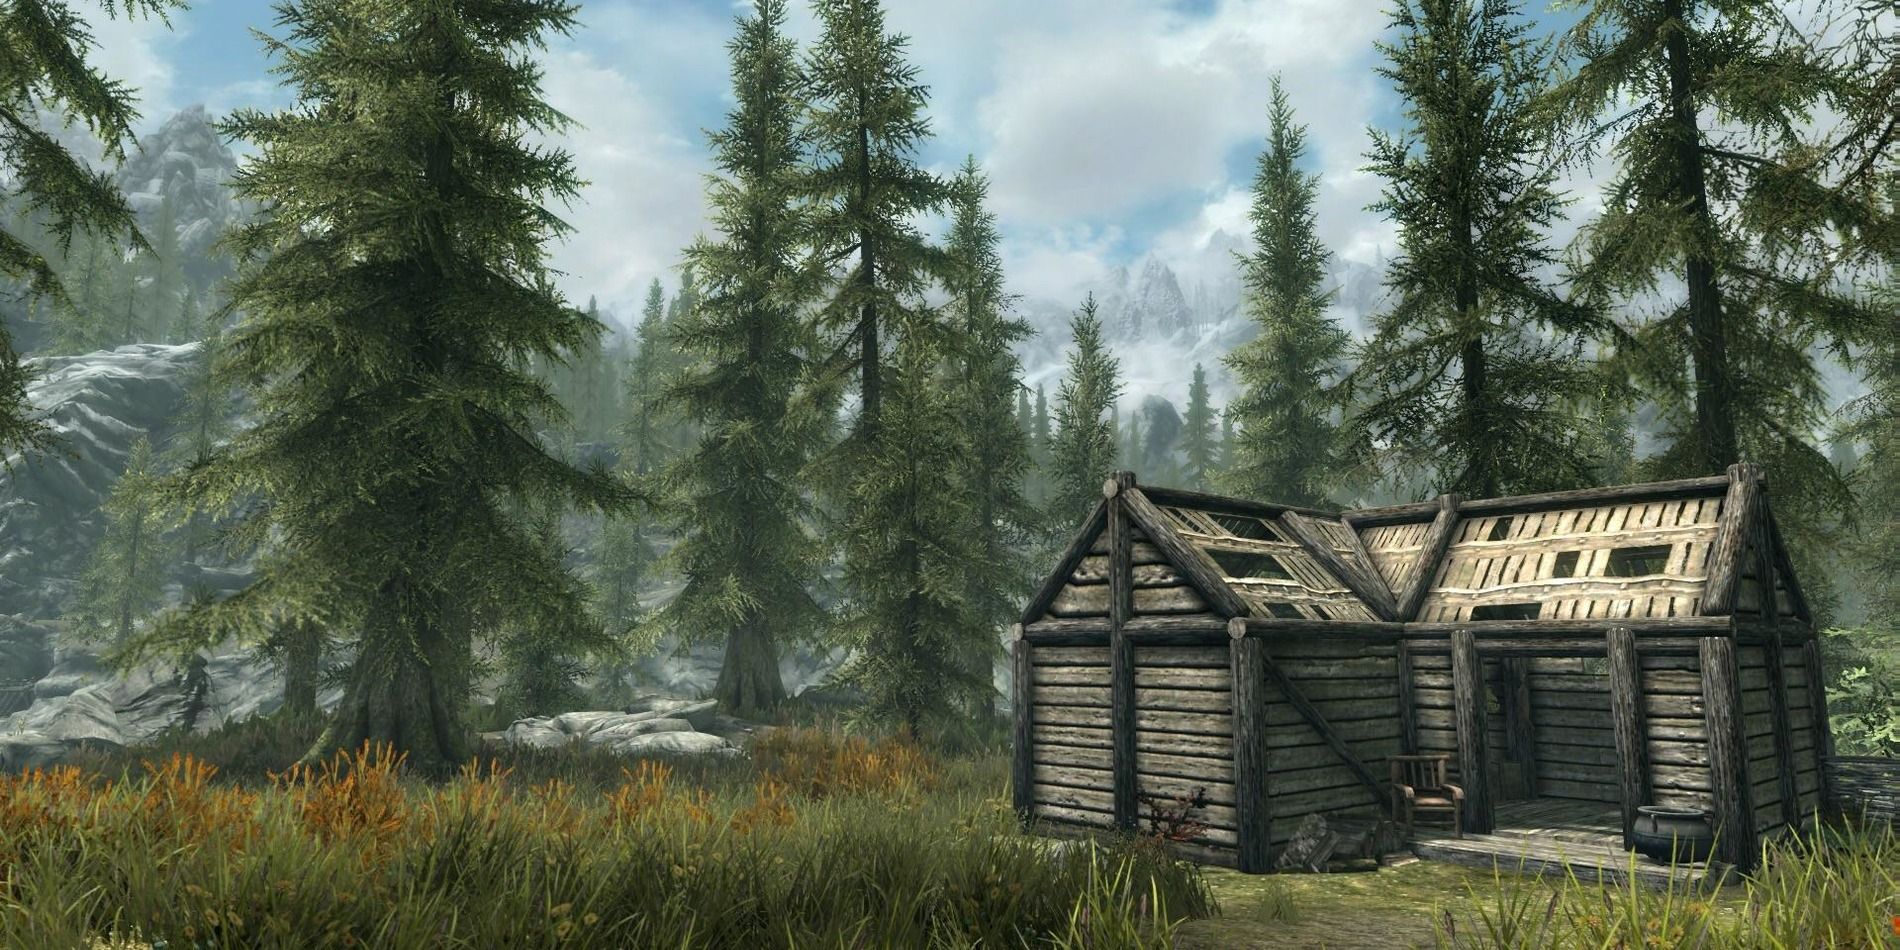 Anise's Cabin near a forest in skyrim